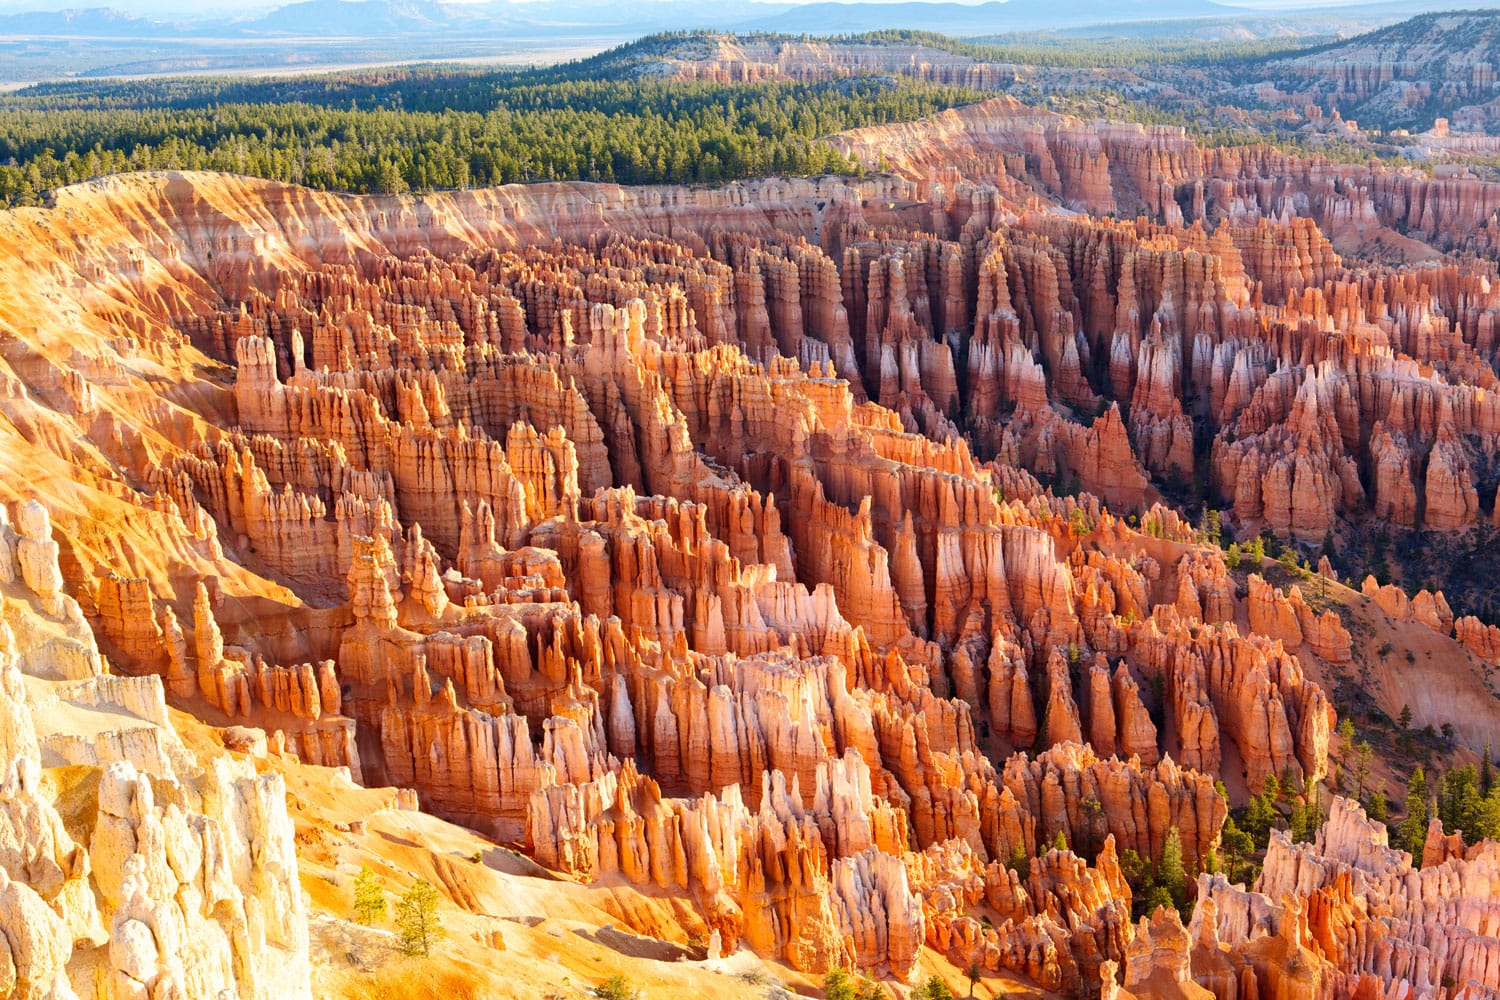 Amphitheater from Inspiration Point at sunrise, Bryce Canyon National Park, Utah, USA